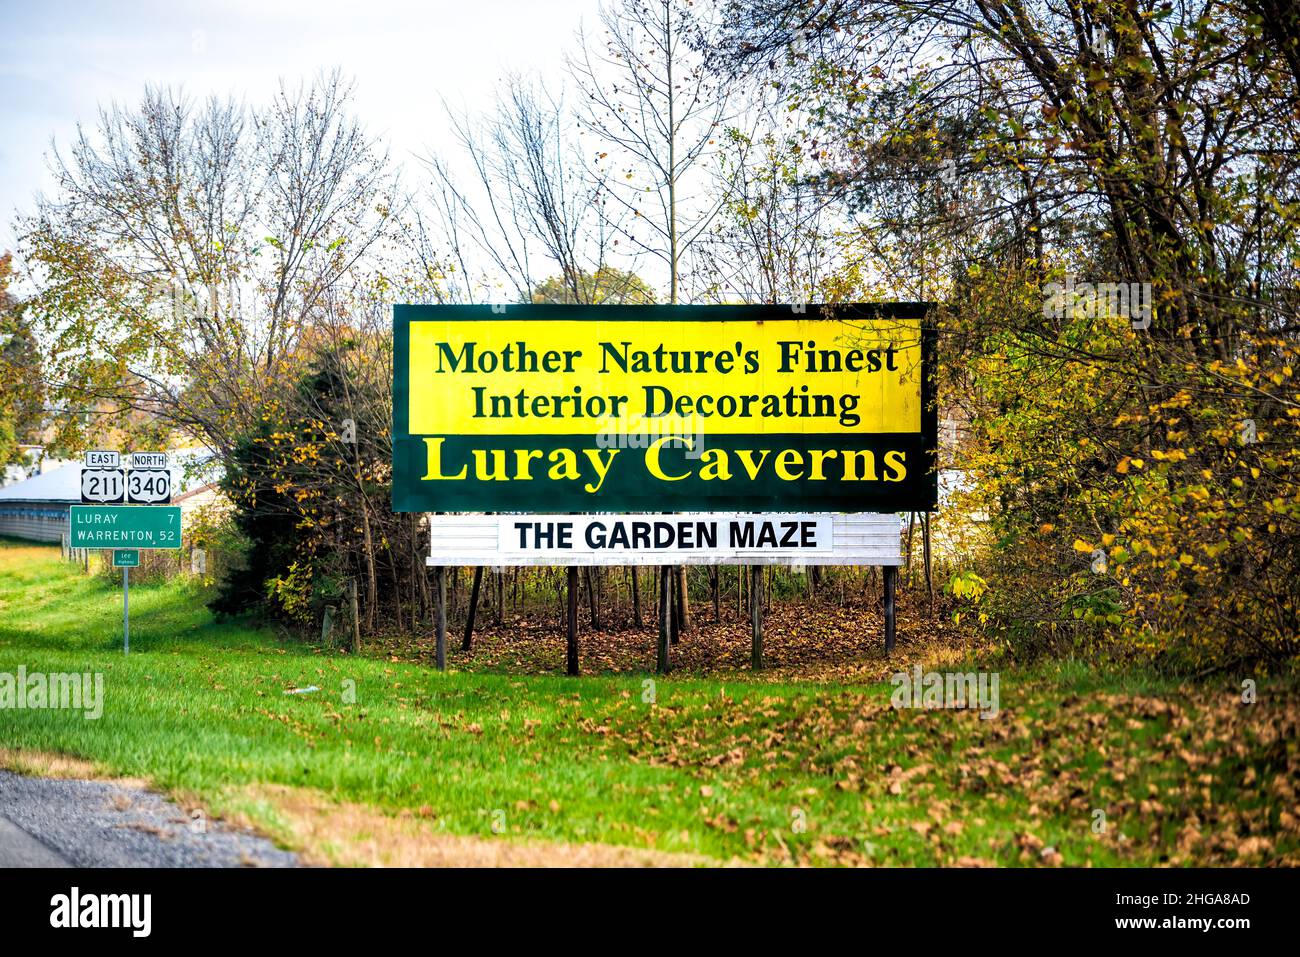 Shenandoah , USA - October 27, 2020: Luray caverns road sign advertisement in Virginia for cave stalagmites rock formations and the garden maze in aut Stock Photo